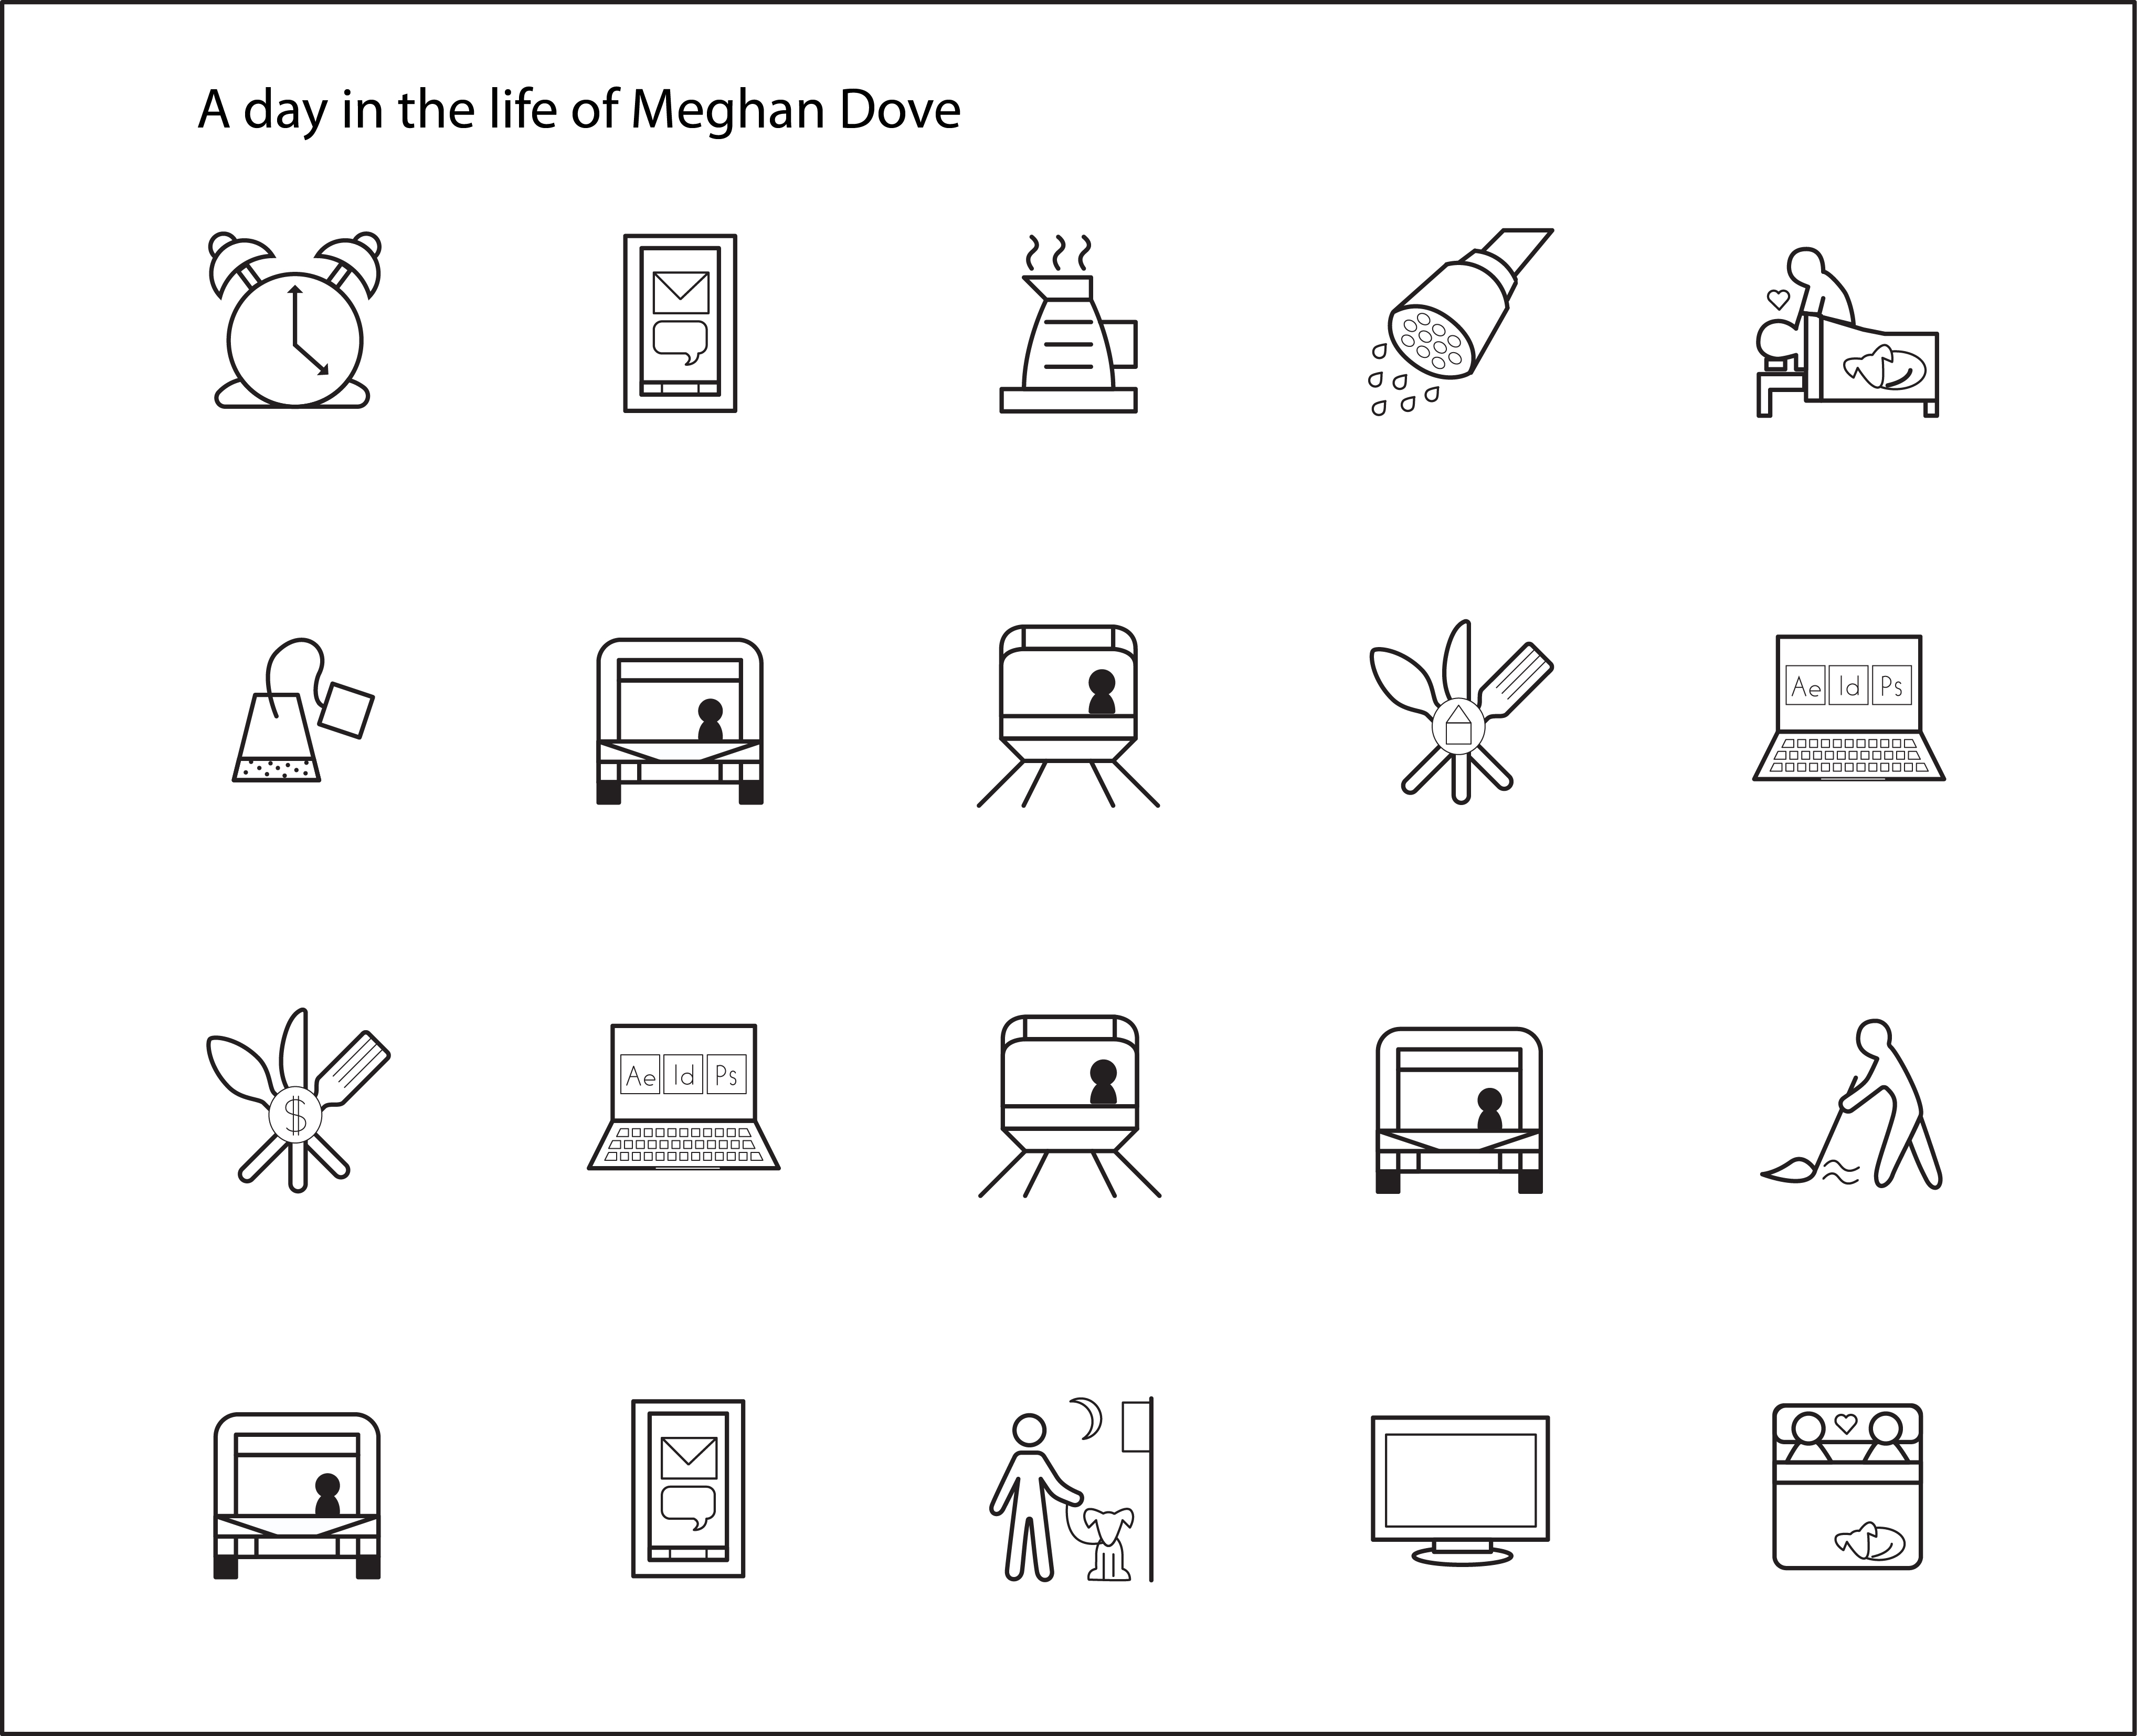 A page of icons designed by Meghan Dove